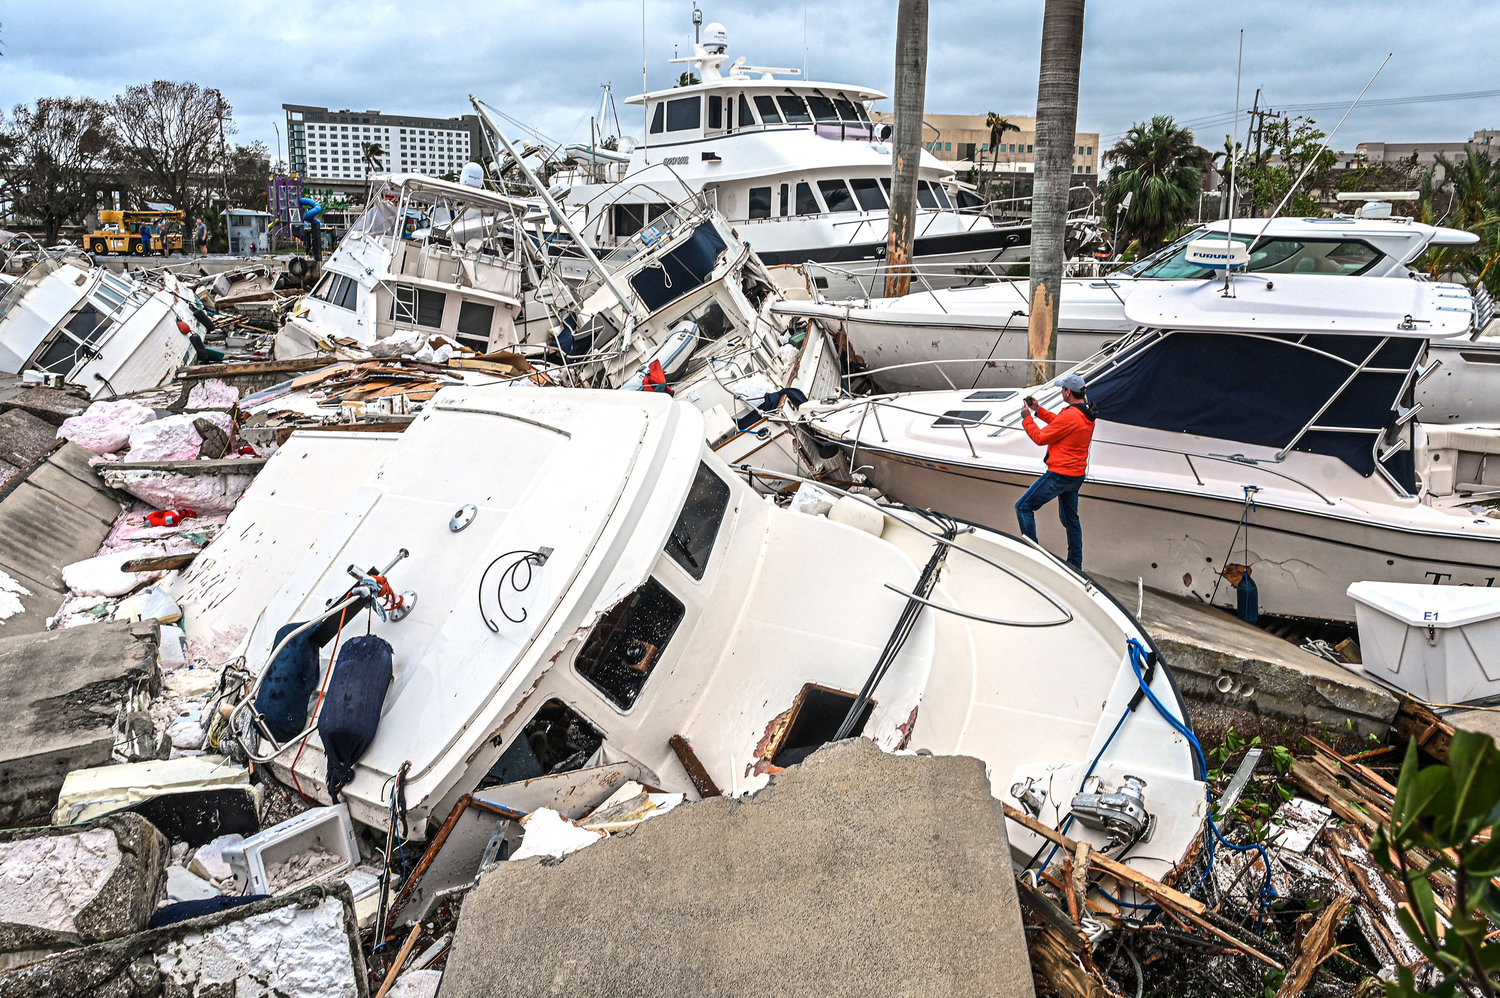 A man takes photos of boats damaged by Hurricane Ian in Fort Myers, Florida, on September 29, 2022. - Hurricane Ian left much of coastal southwest Florida in darkness early on Thursday, bringing "catastrophic" flooding that left officials readying a huge emergency response to a storm of rare intensity. The National Hurricane Center said the eye of the "extremely dangerous" hurricane made landfall just after 3:00 pm (1900 GMT) on the barrier island of Cayo Costa, west of the city of Fort Myers. (GIORGIO VIERA/AFP via Getty Images/TNS)